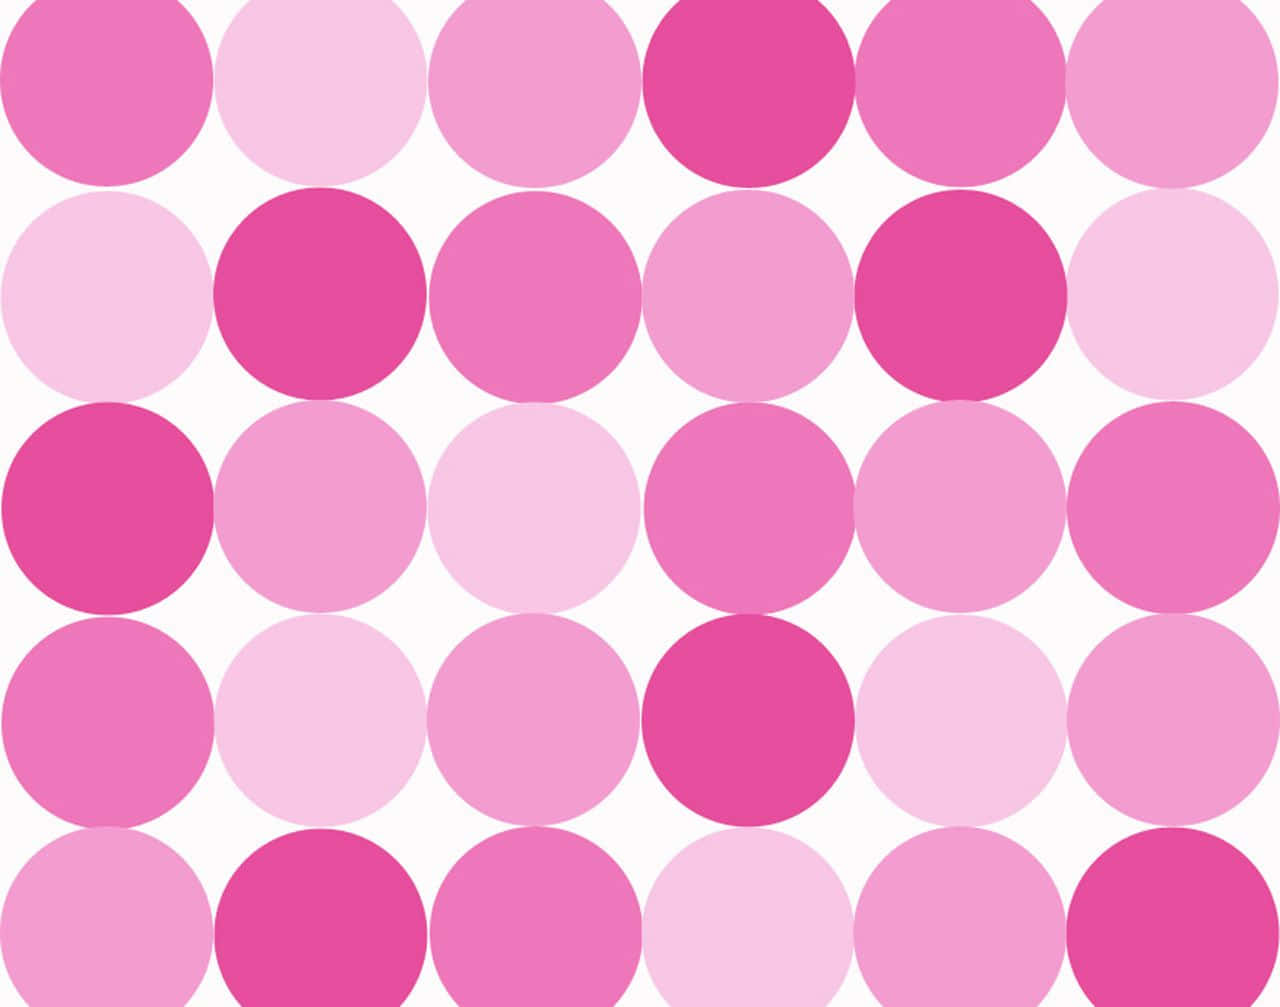 Pink Polka Dot In Different Shades Wallpaper